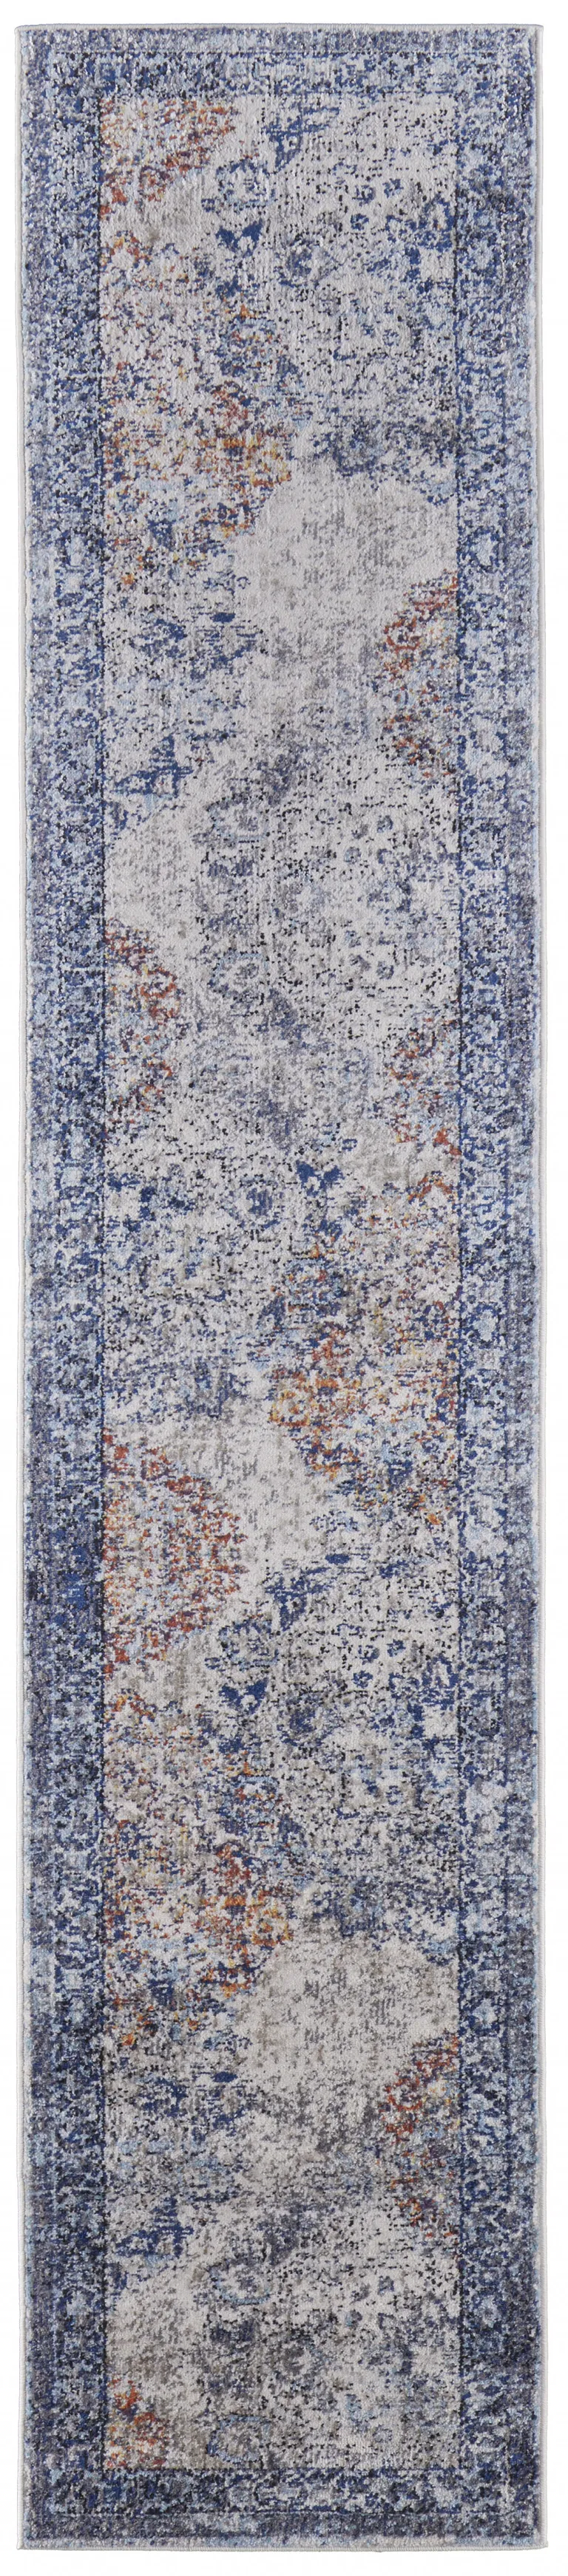 8' Blue Ivory And Red Floral Power Loom Distressed Stain Resistant Runner Rug Photo 1